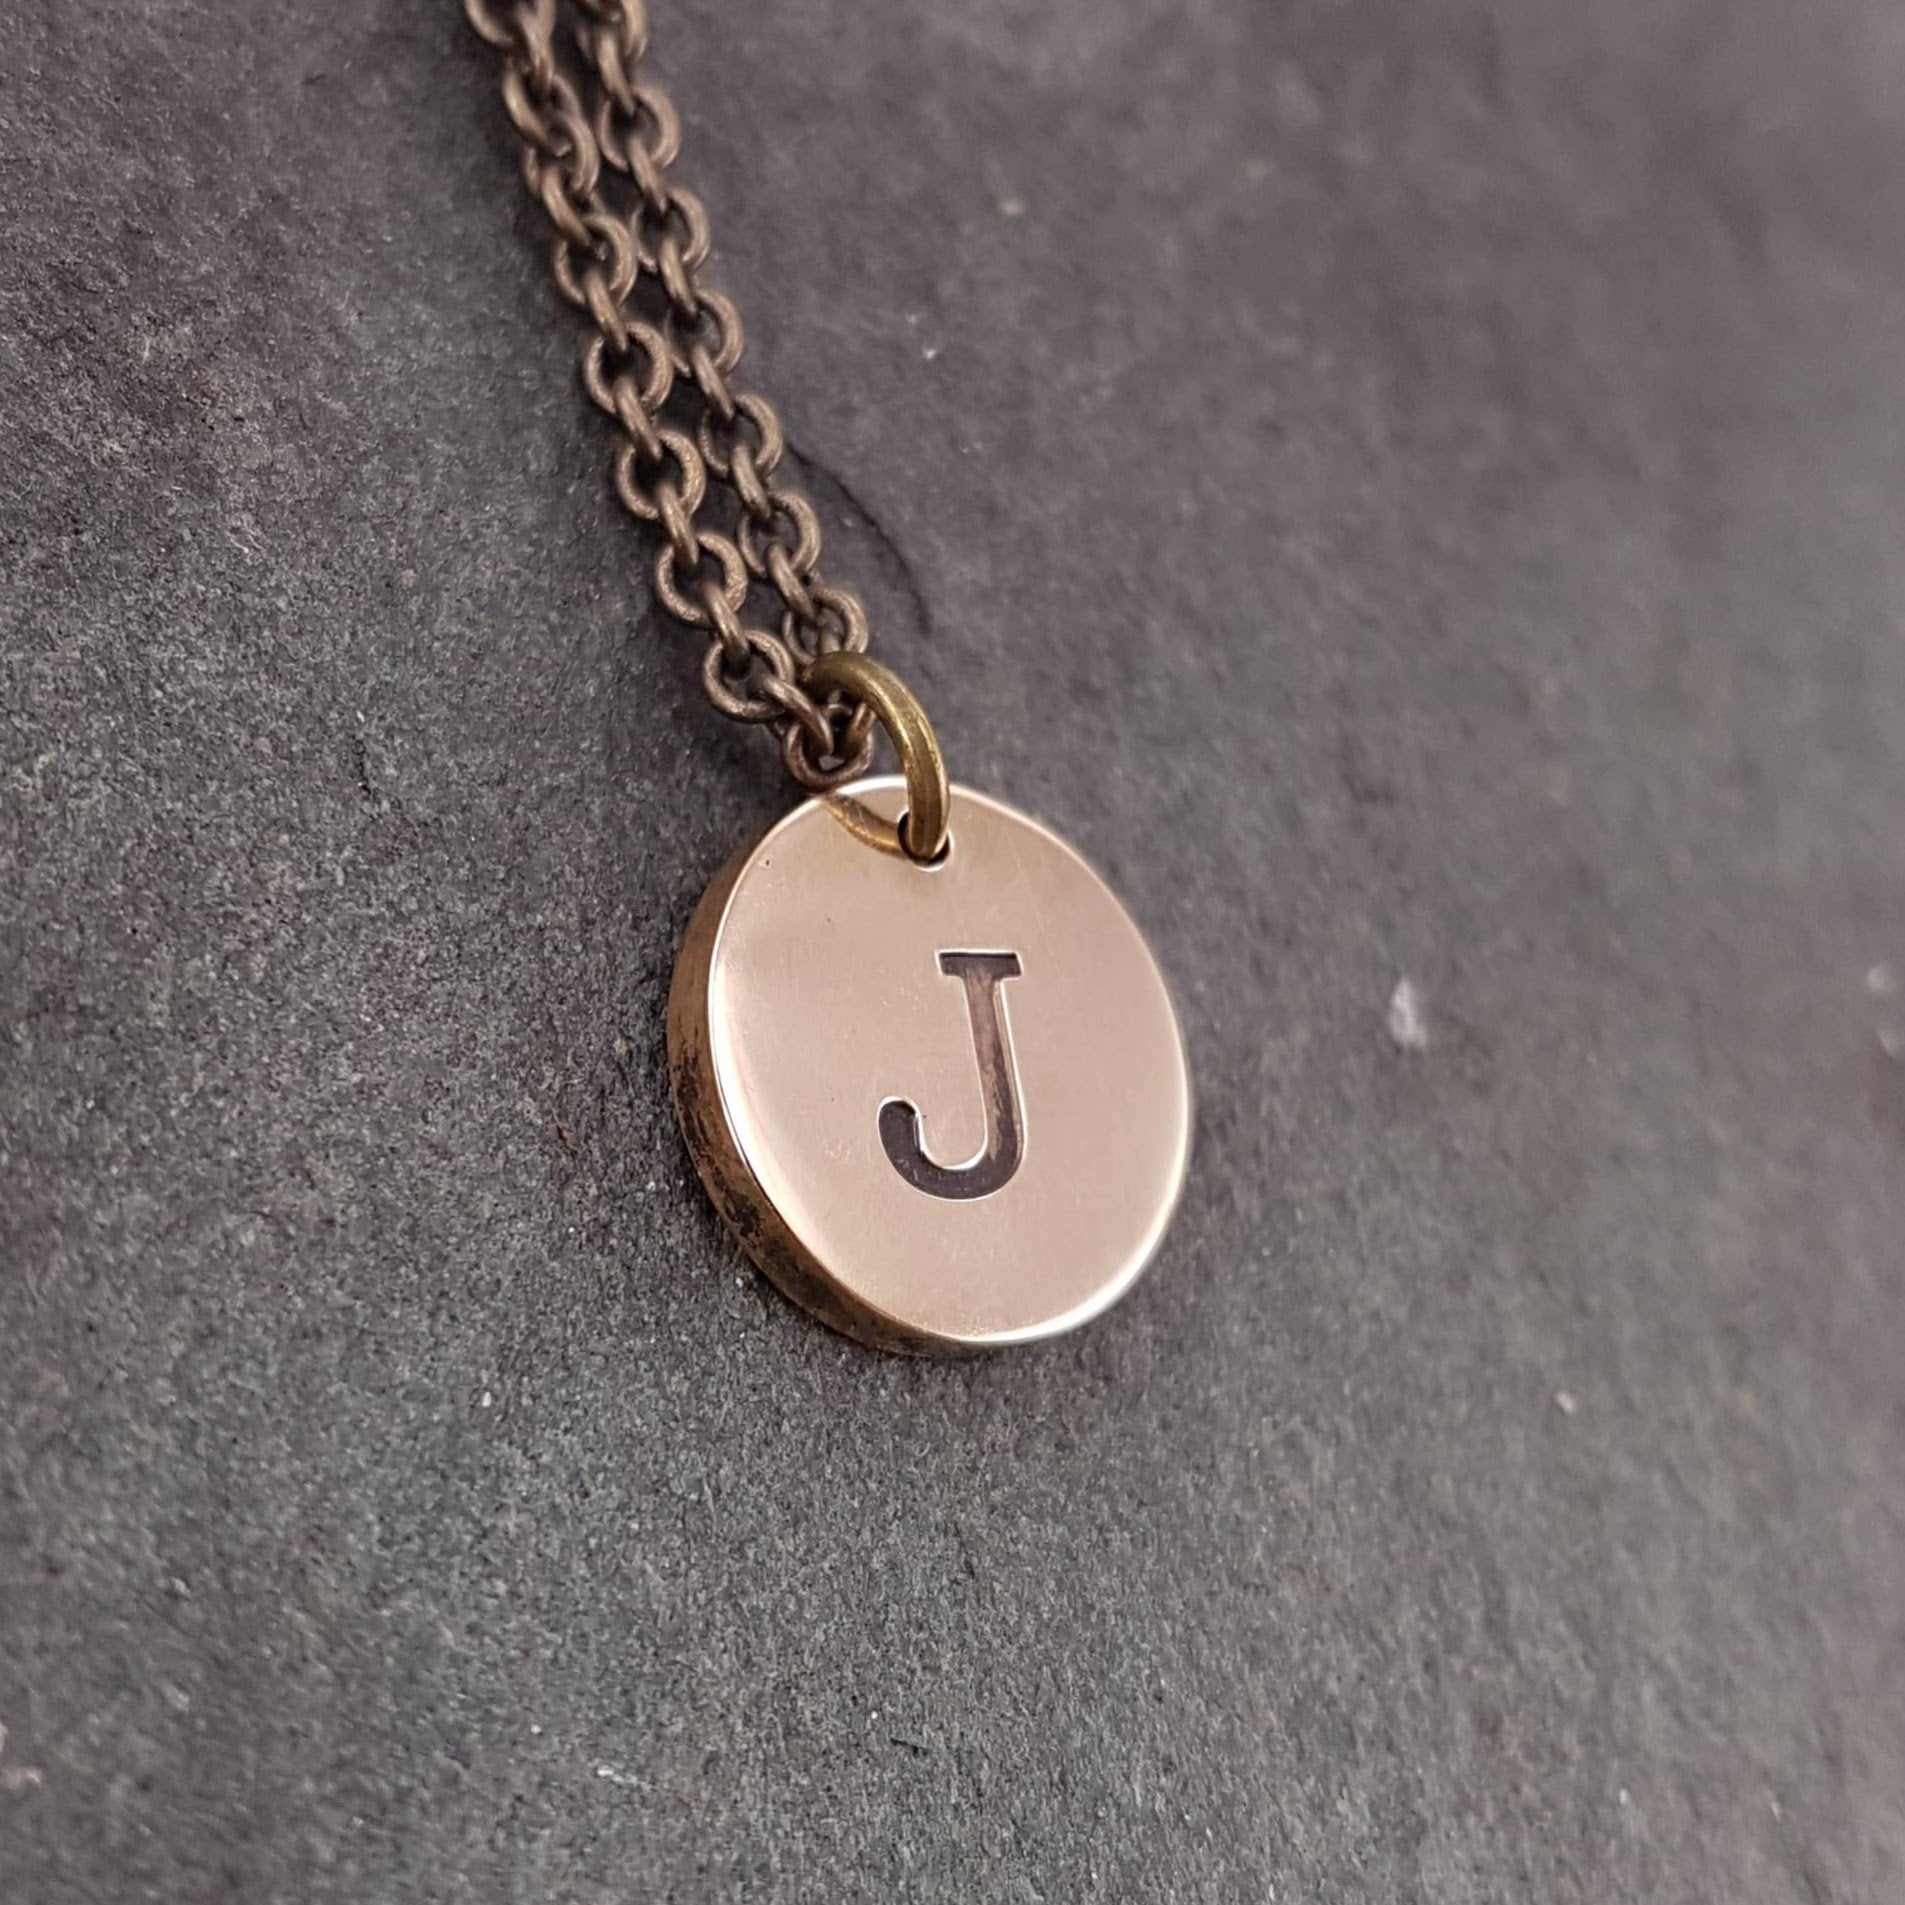 Engraved Initial Charm Necklace - Solid Bronze Monogram Pendant - Pers -  Gwen Delicious Jewelry Designs